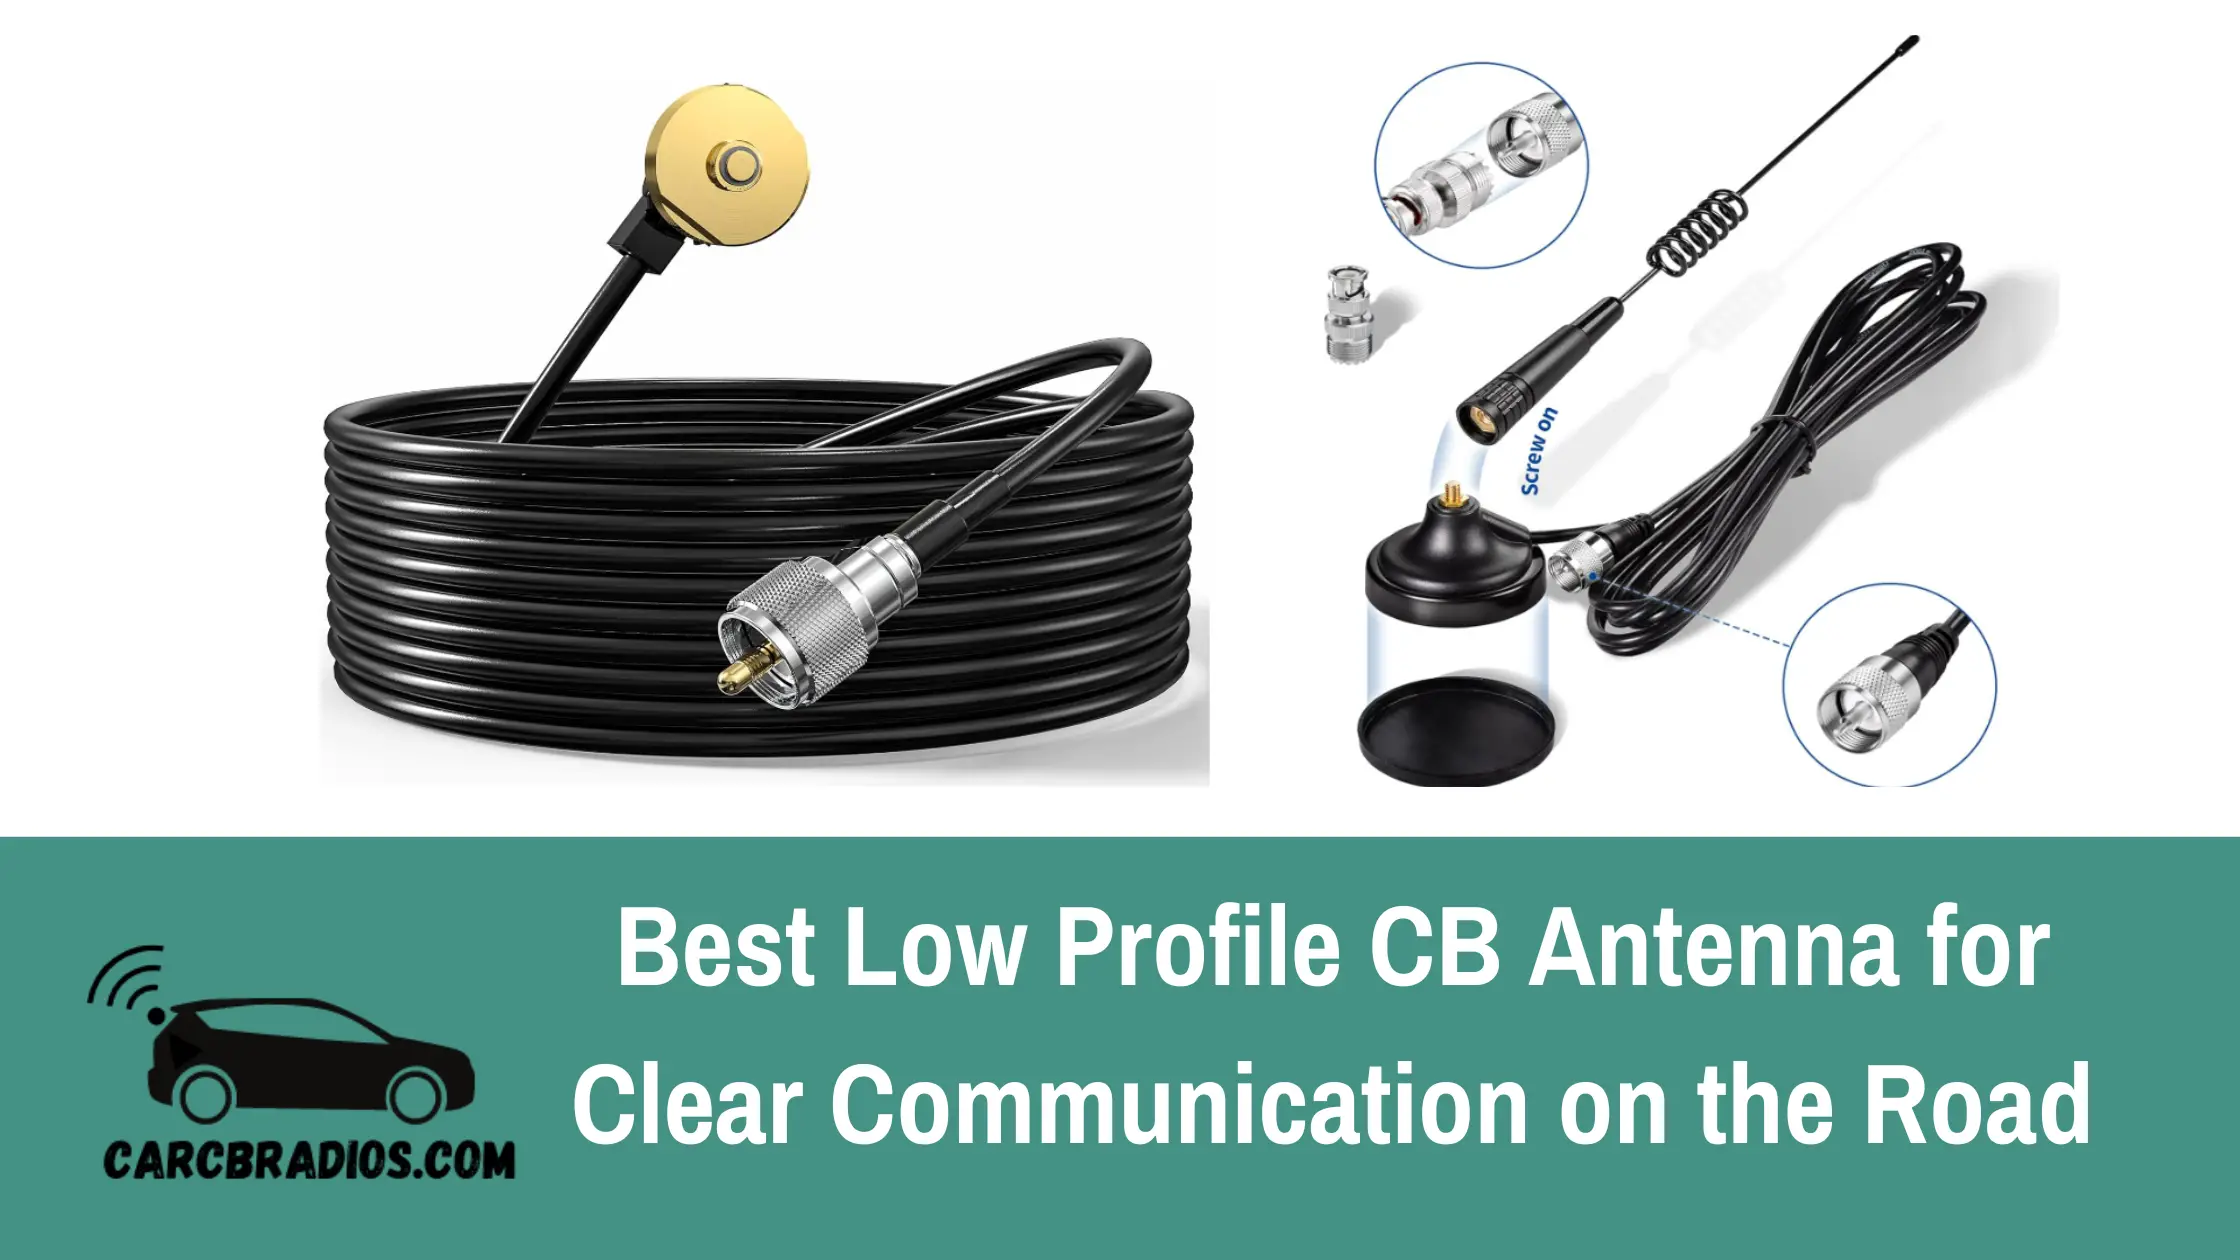 When looking for the best low profile CB antenna, there are a few key factors to consider. First, you'll want to make sure the antenna is compatible with your CB radio and has the appropriate connector. Additionally, you'll want to look for an antenna with a low SWR (standing wave ratio), which indicates how efficiently the antenna is transmitting and receiving signals. Finally, you'll want to consider the antenna's size and mounting options to ensure it will fit on your vehicle and can be installed in a way that won't interfere with other components.